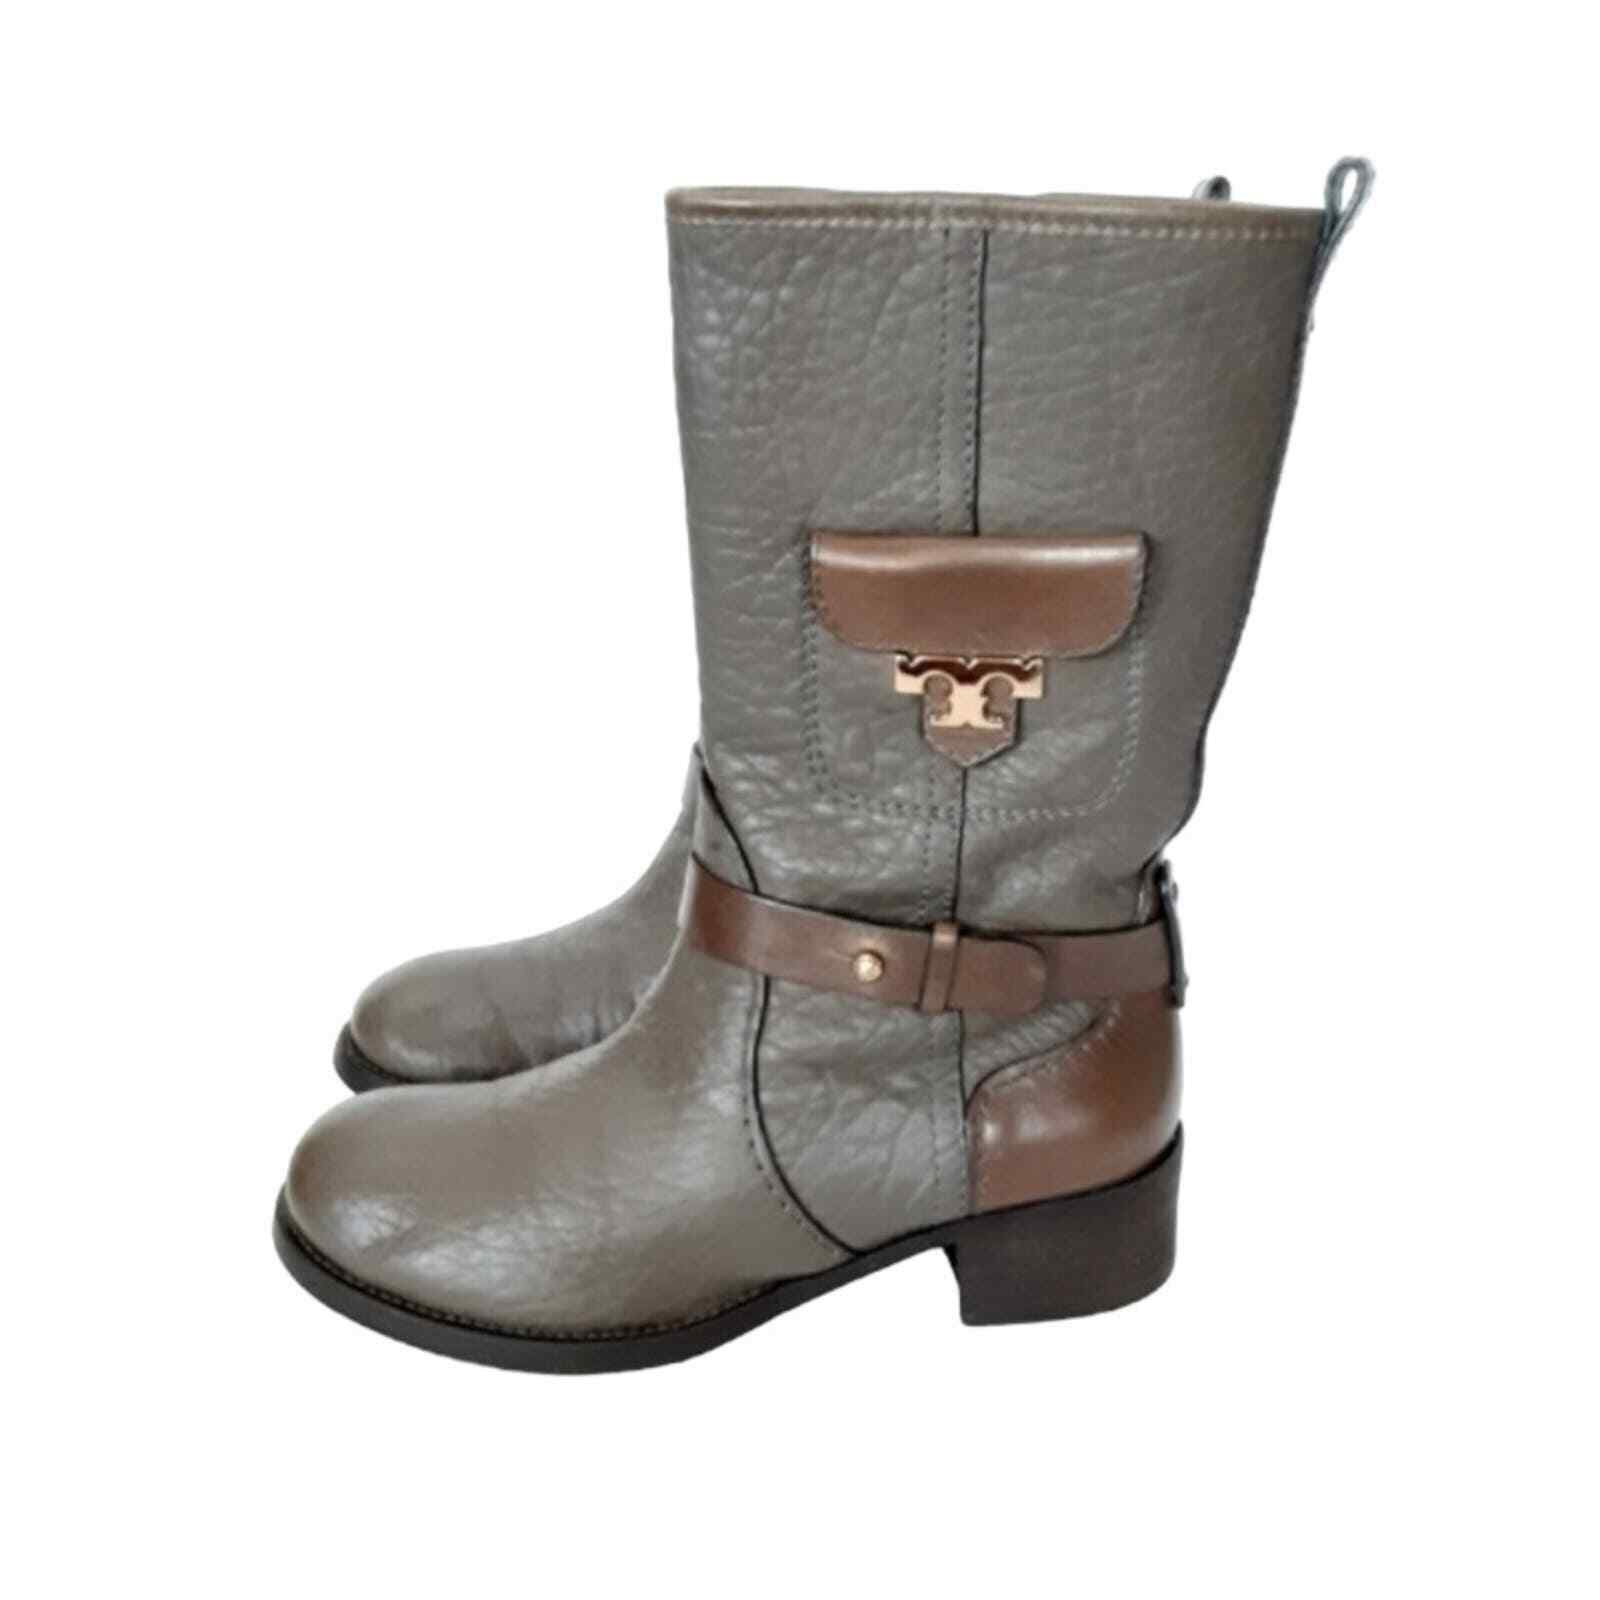 Tory Burch Leona Riding Boots Gray Pebble Leather… - image 3